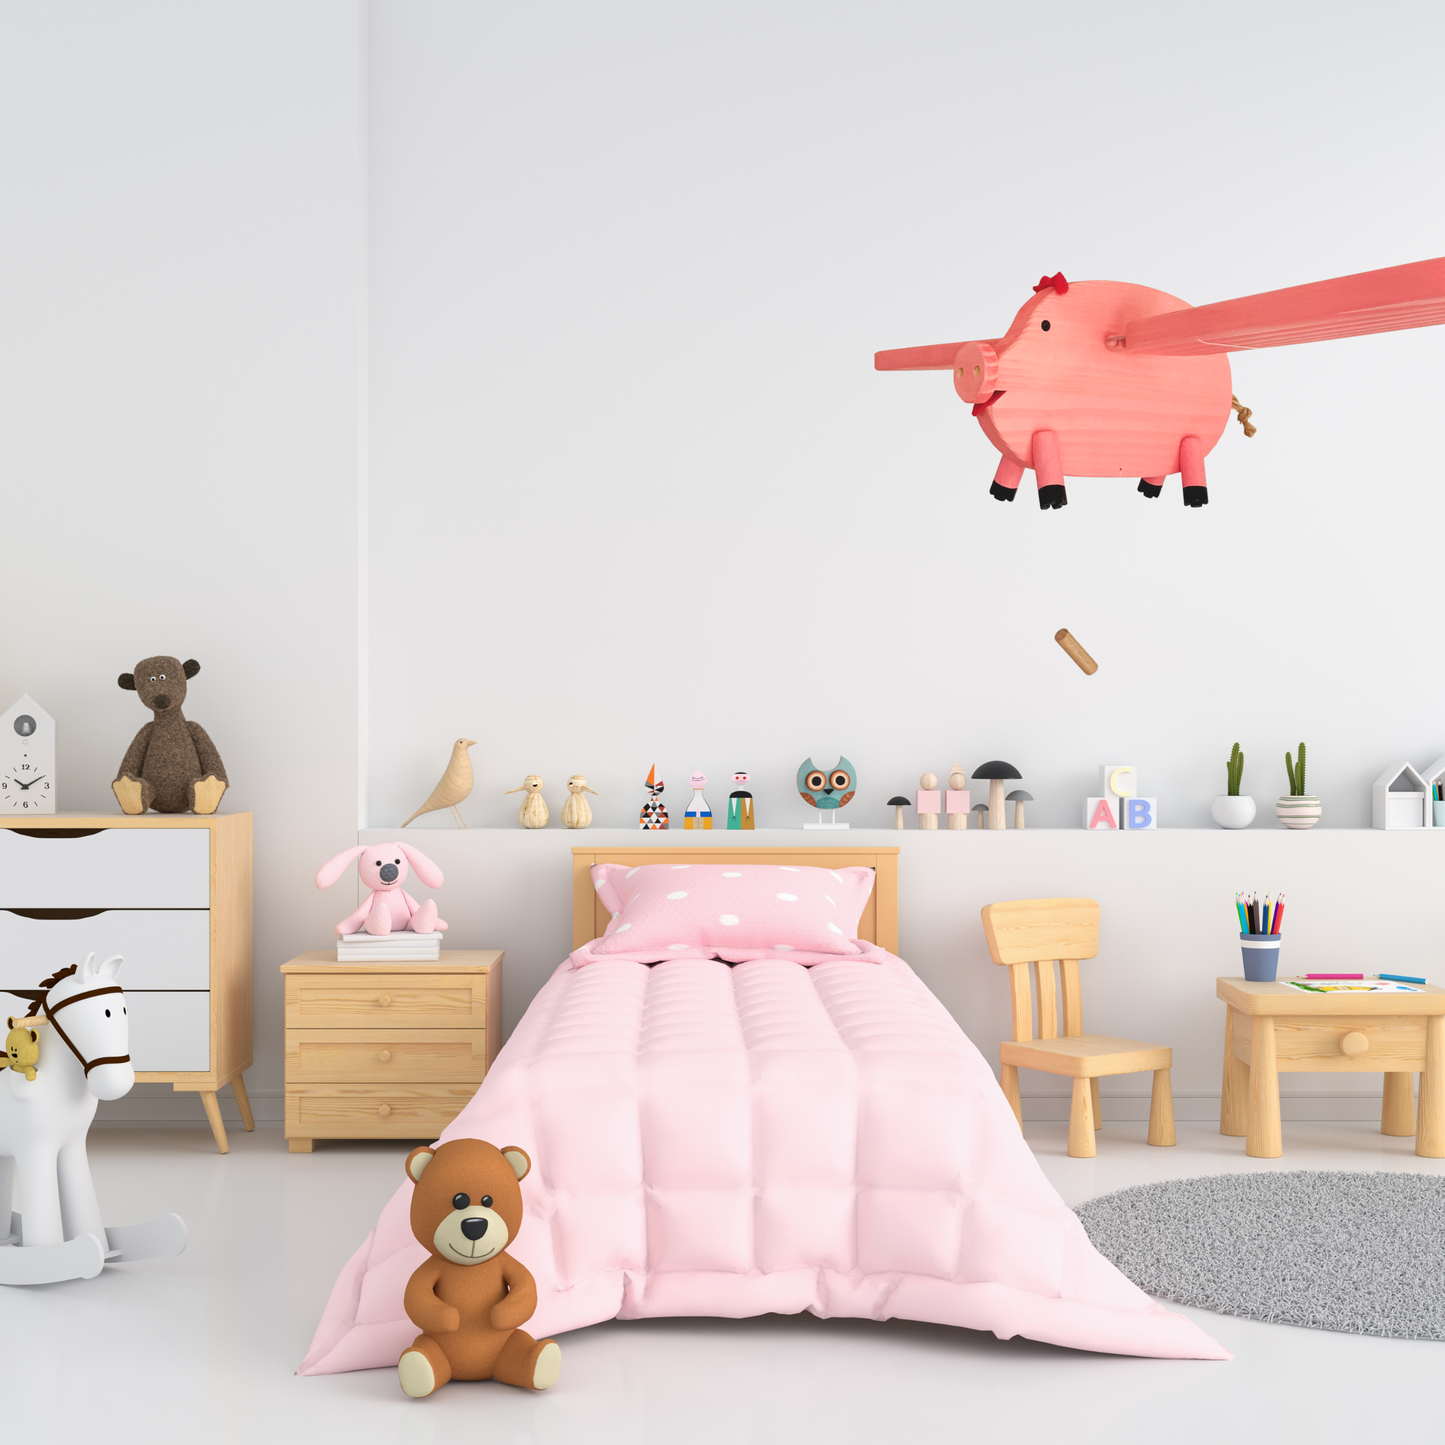 Flying Pink Pig Wooden Baby Mobile - Pig Nursery Decor - Cool Gift for Pig Lovers